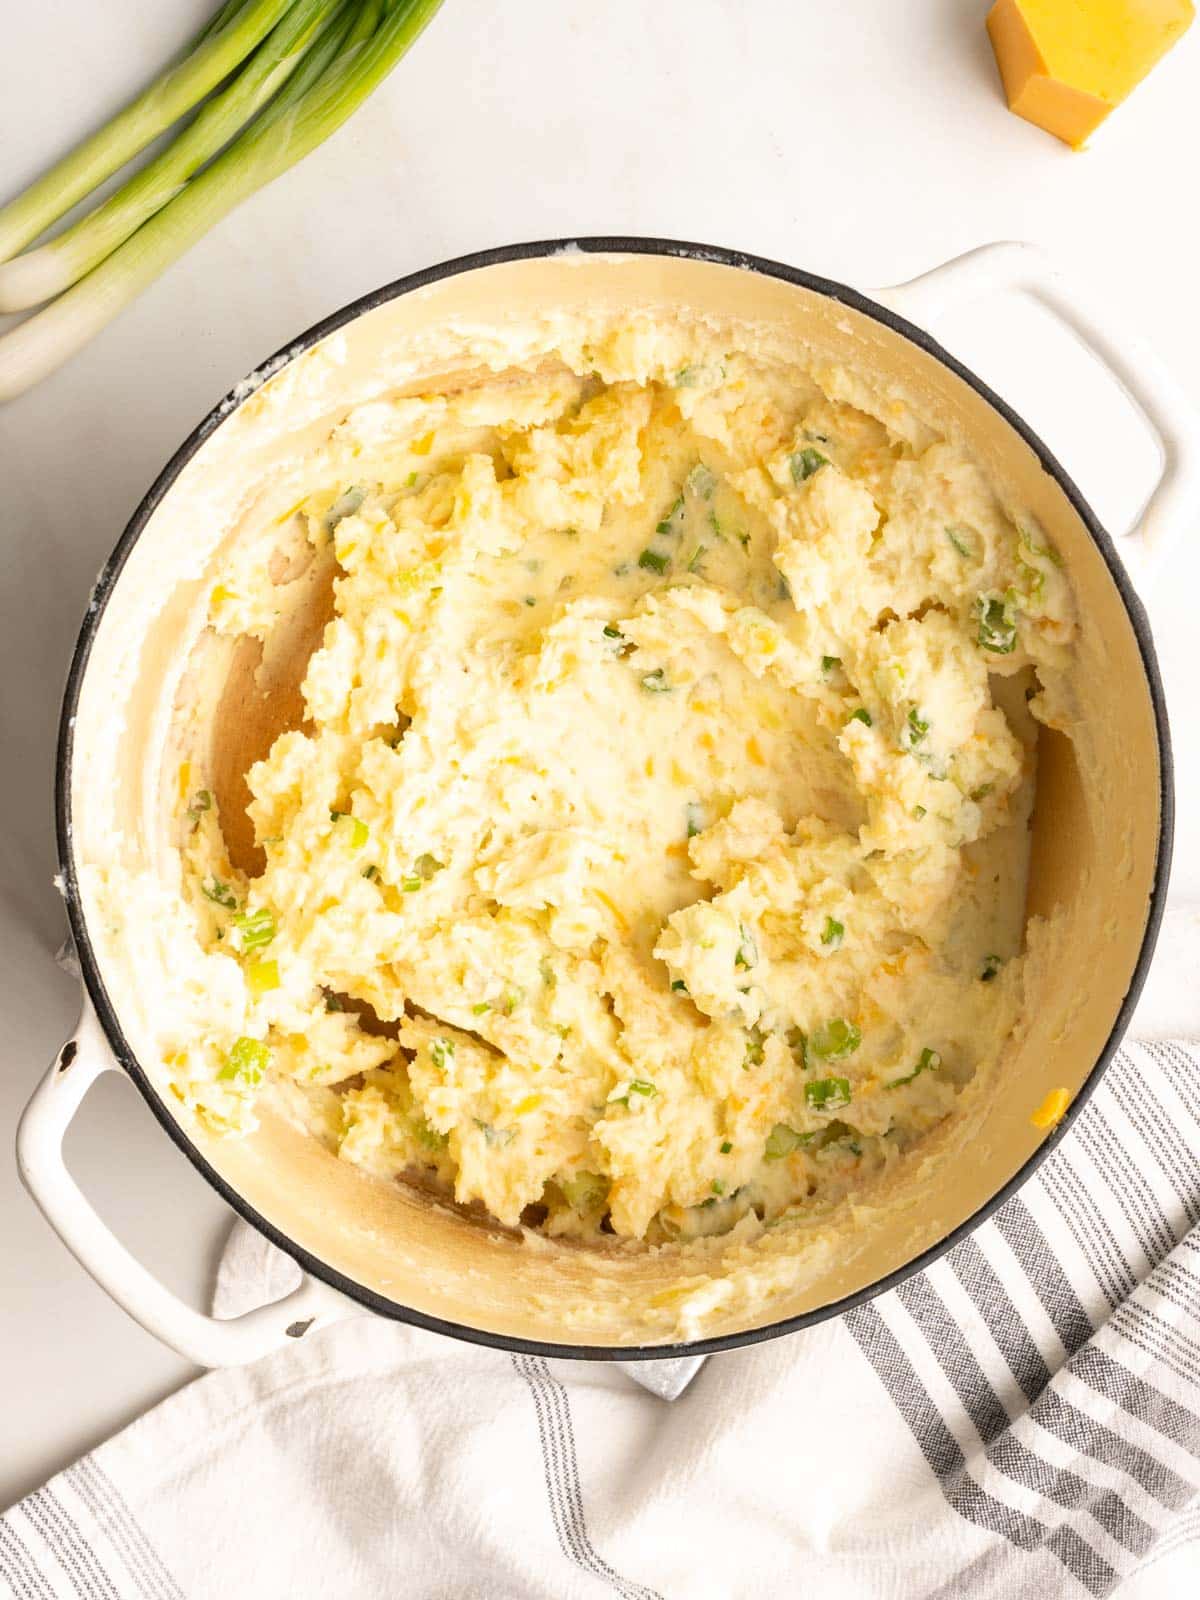 Mashed potatoes with green onion.